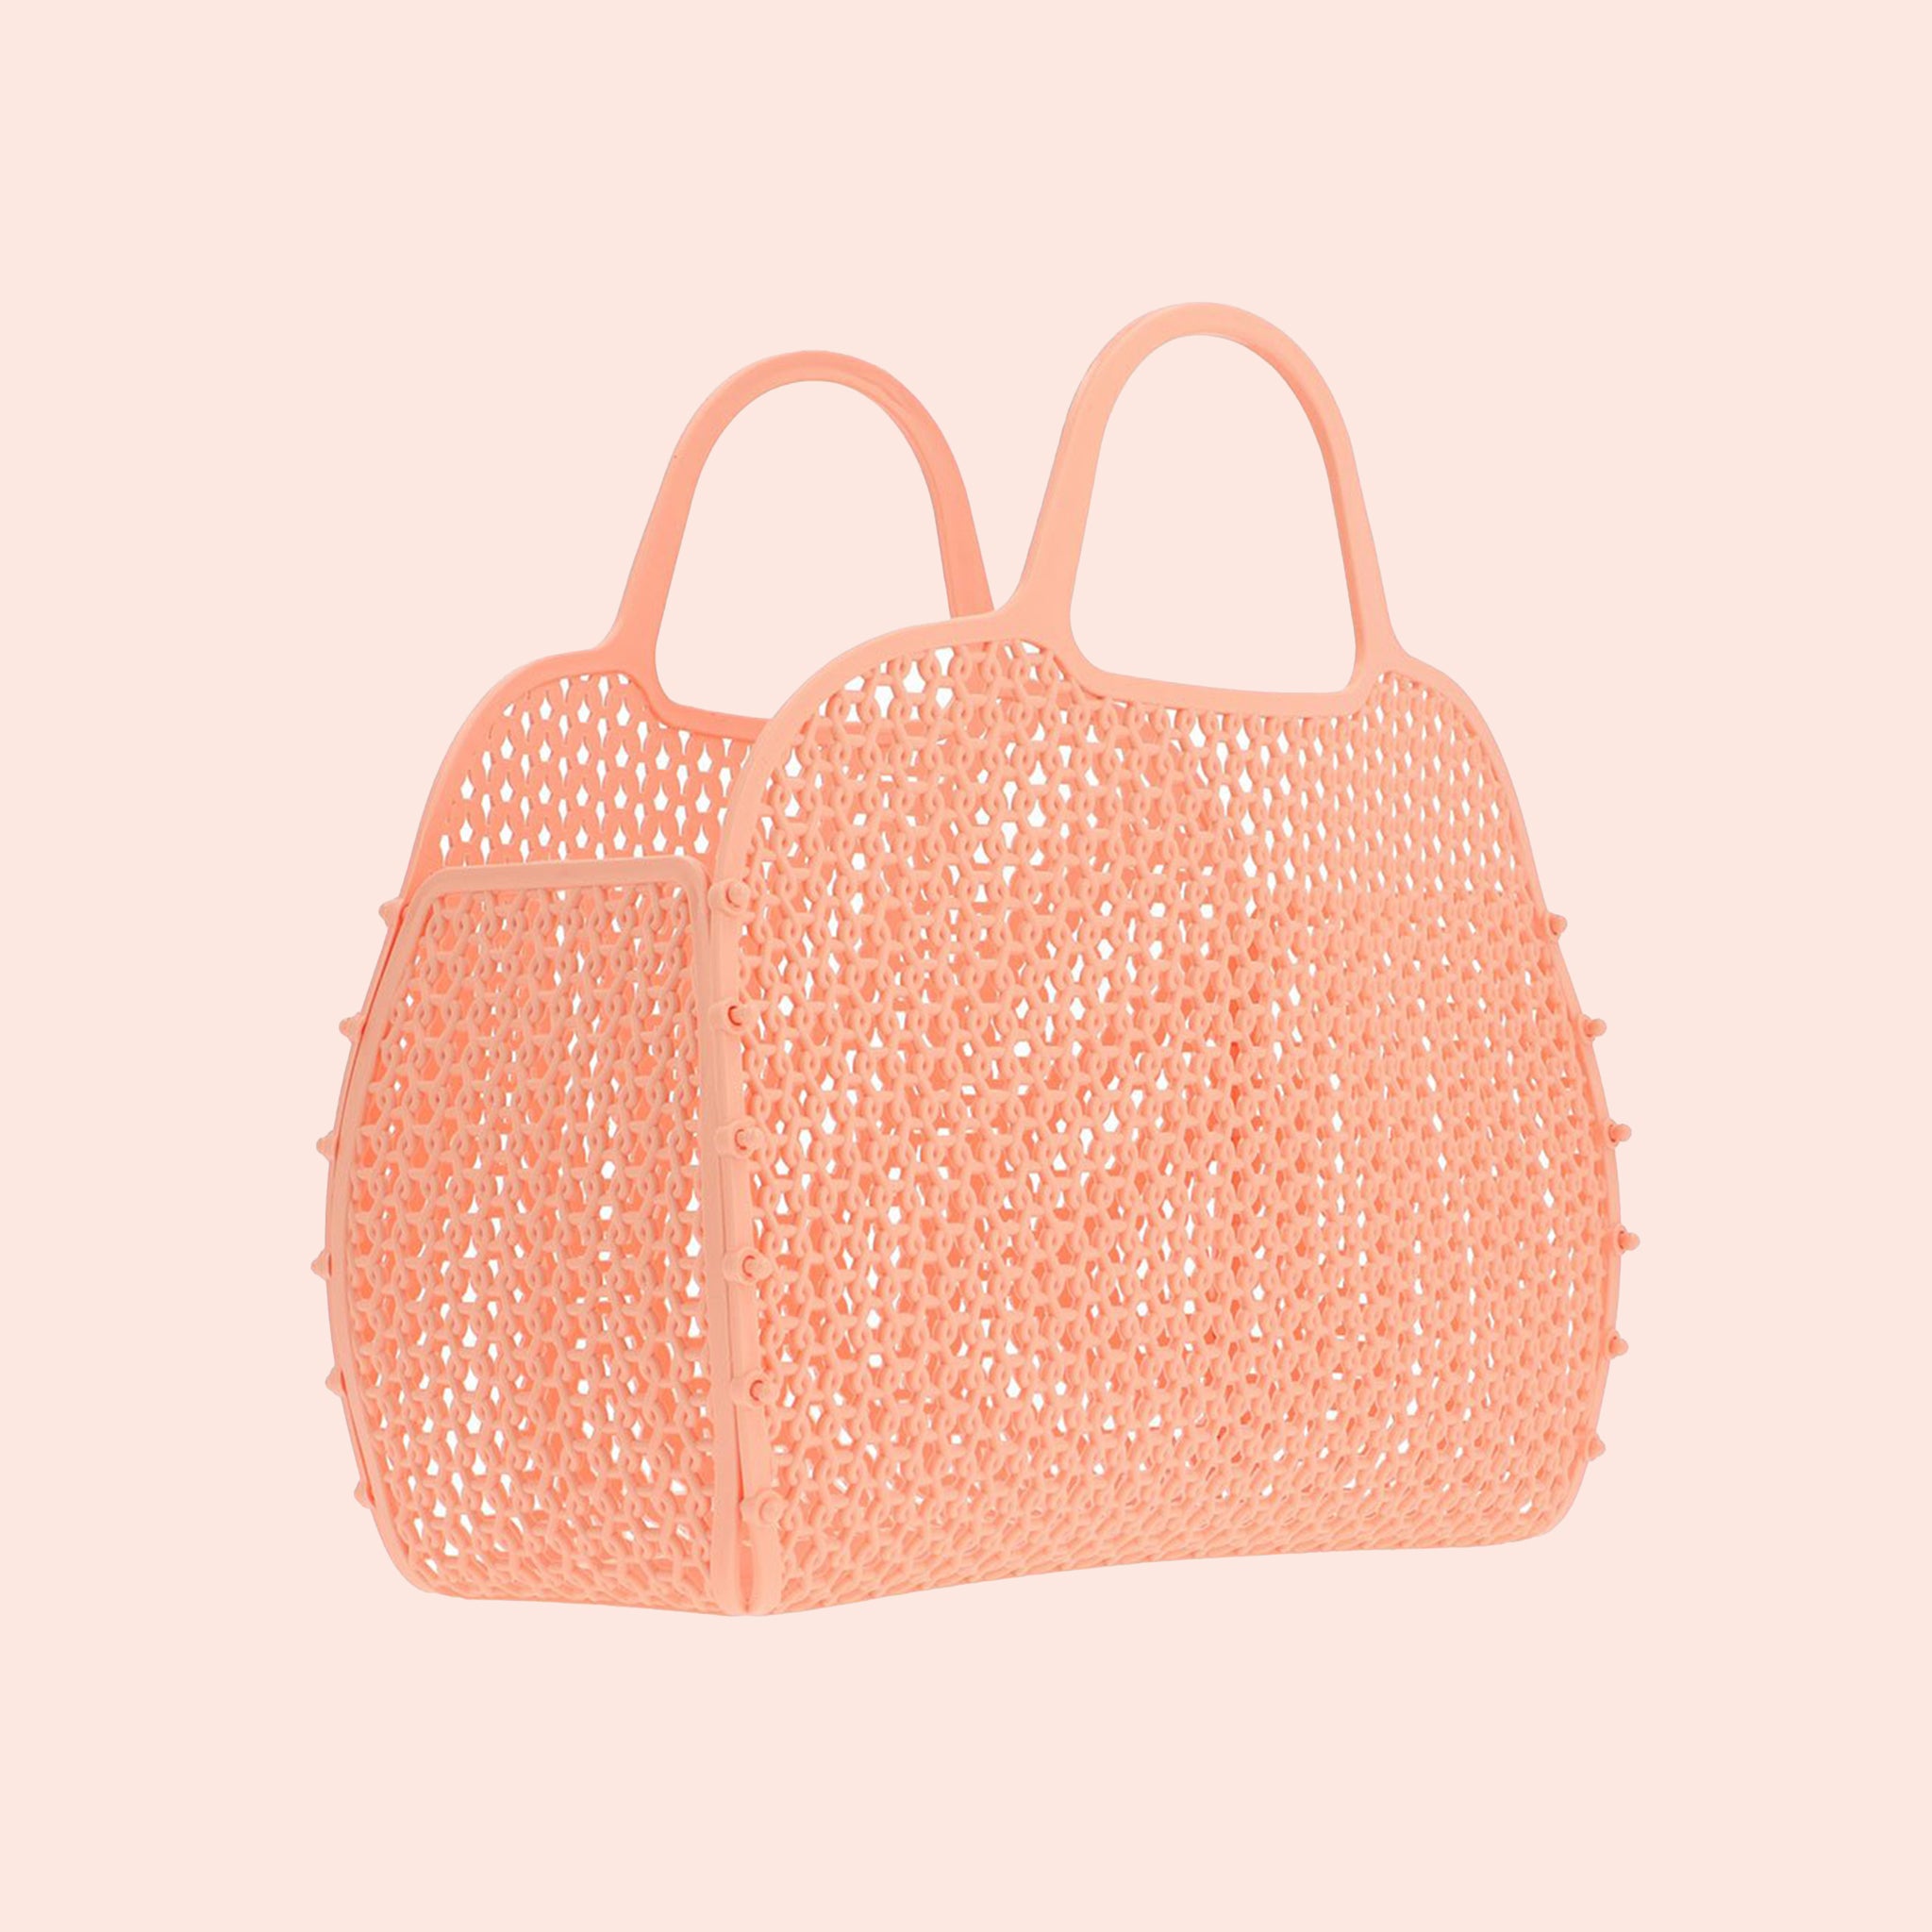 An apricot colored woven plastic handbag with two handles.